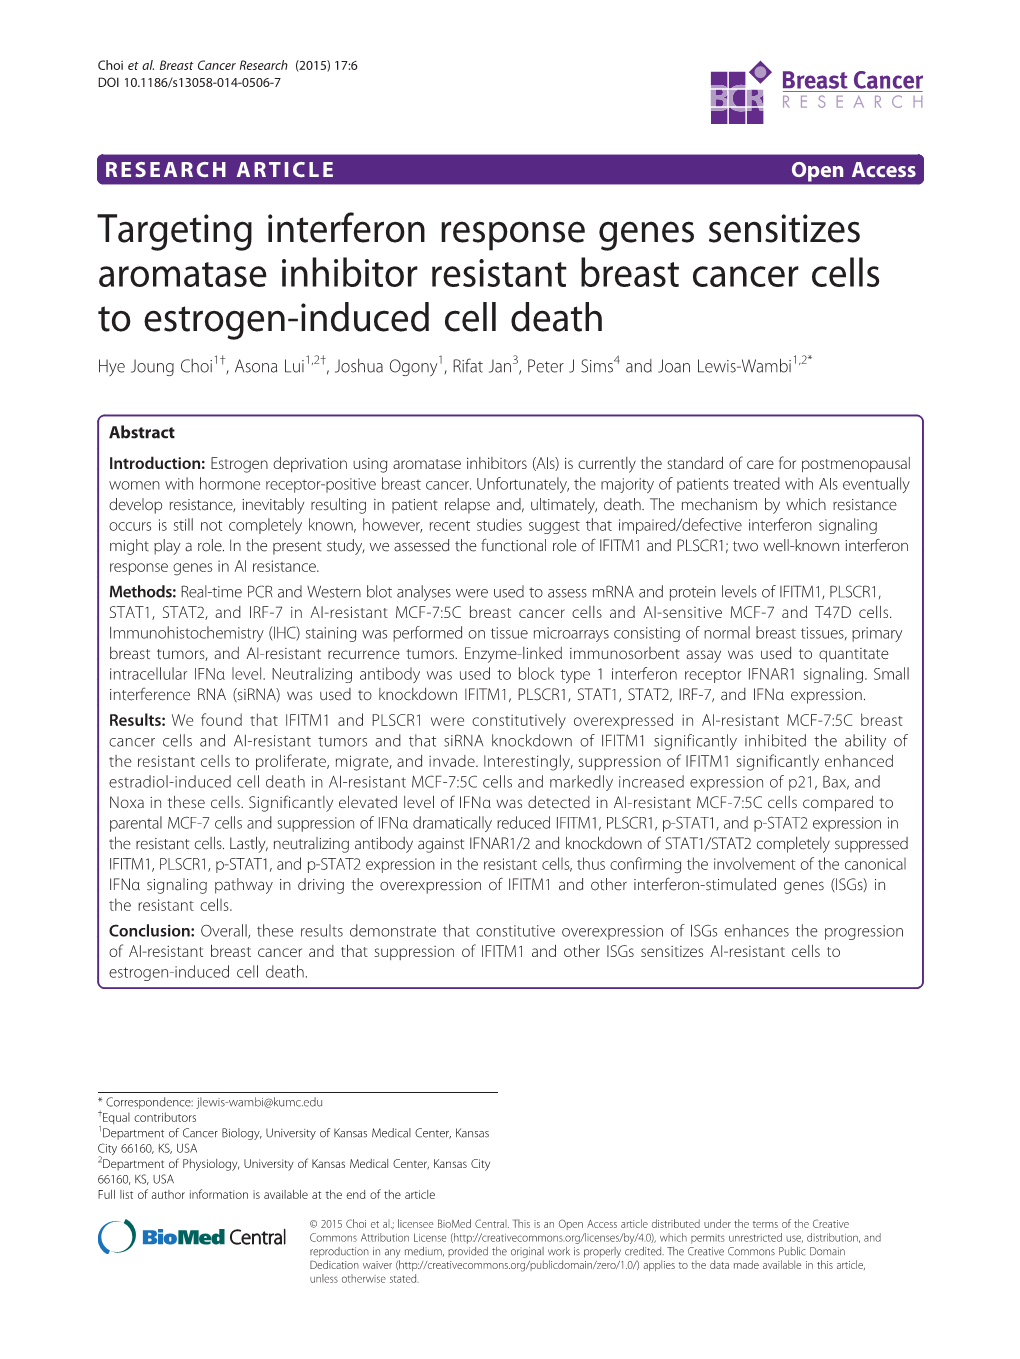 Targeting Interferon Response Genes Sensitizes Aromatase Inhibitor Resistant Breast Cancer Cells to Estrogen-Induced Cell Death